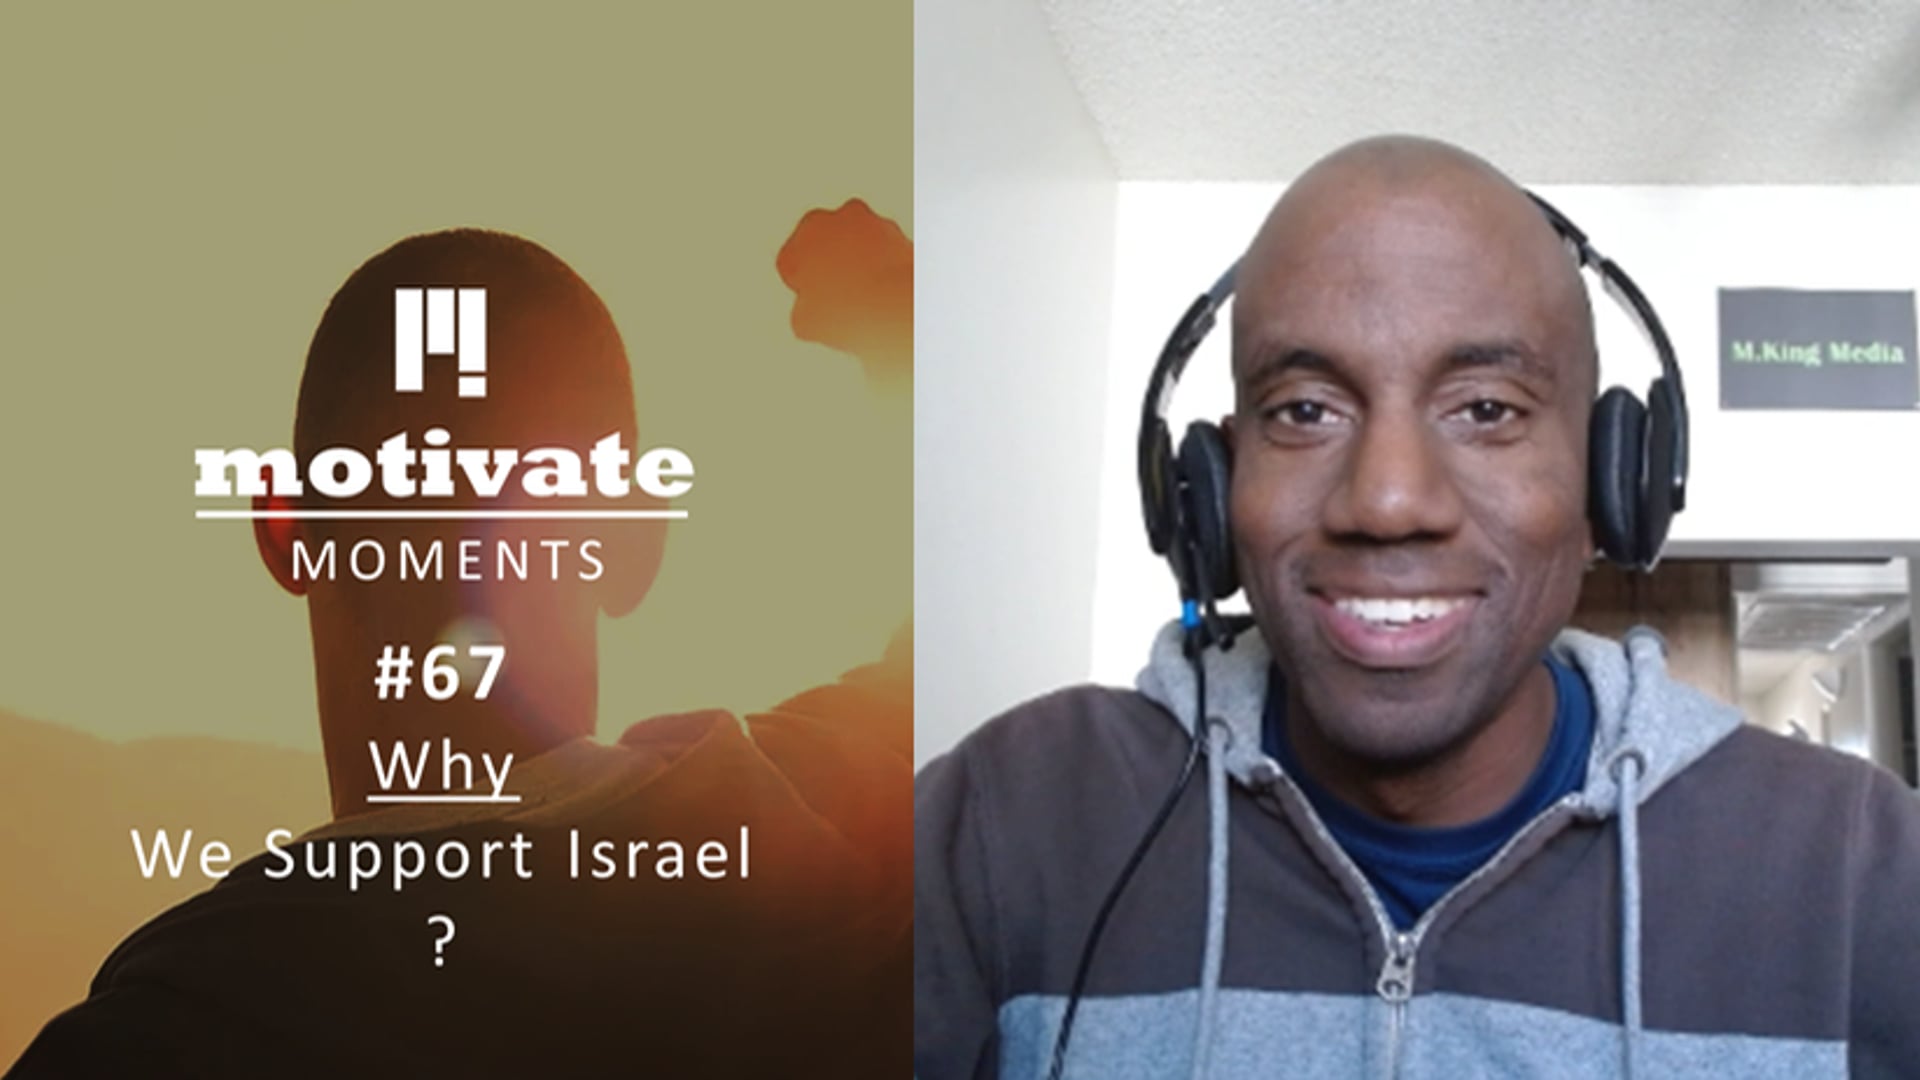 Motivate Moments #67: Why - We Support Israel